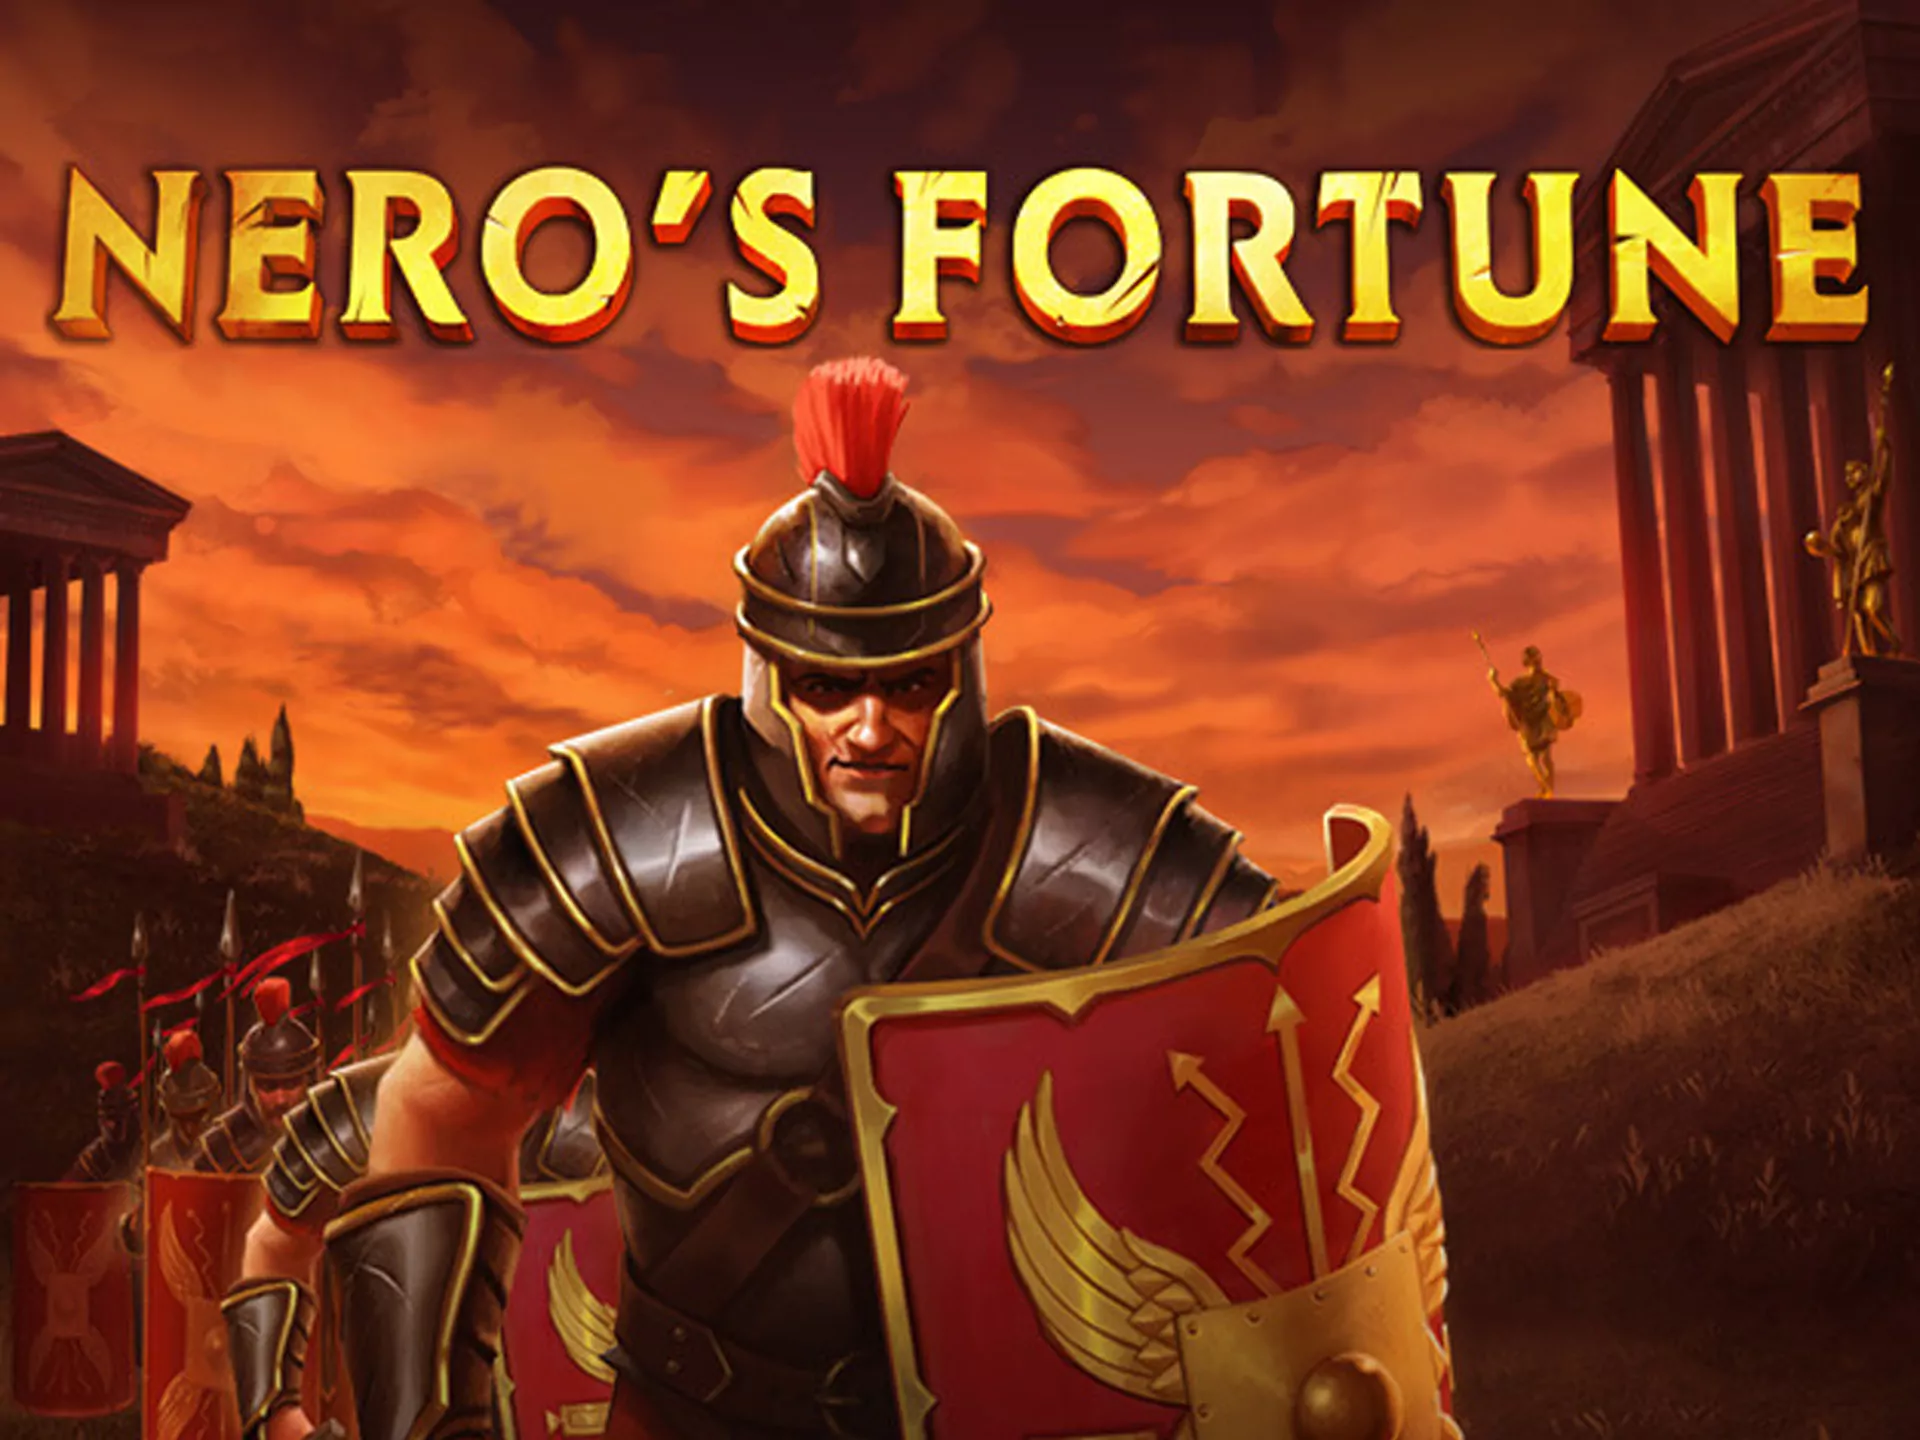 Play the bonus game of Nero's Fortune and become rich.